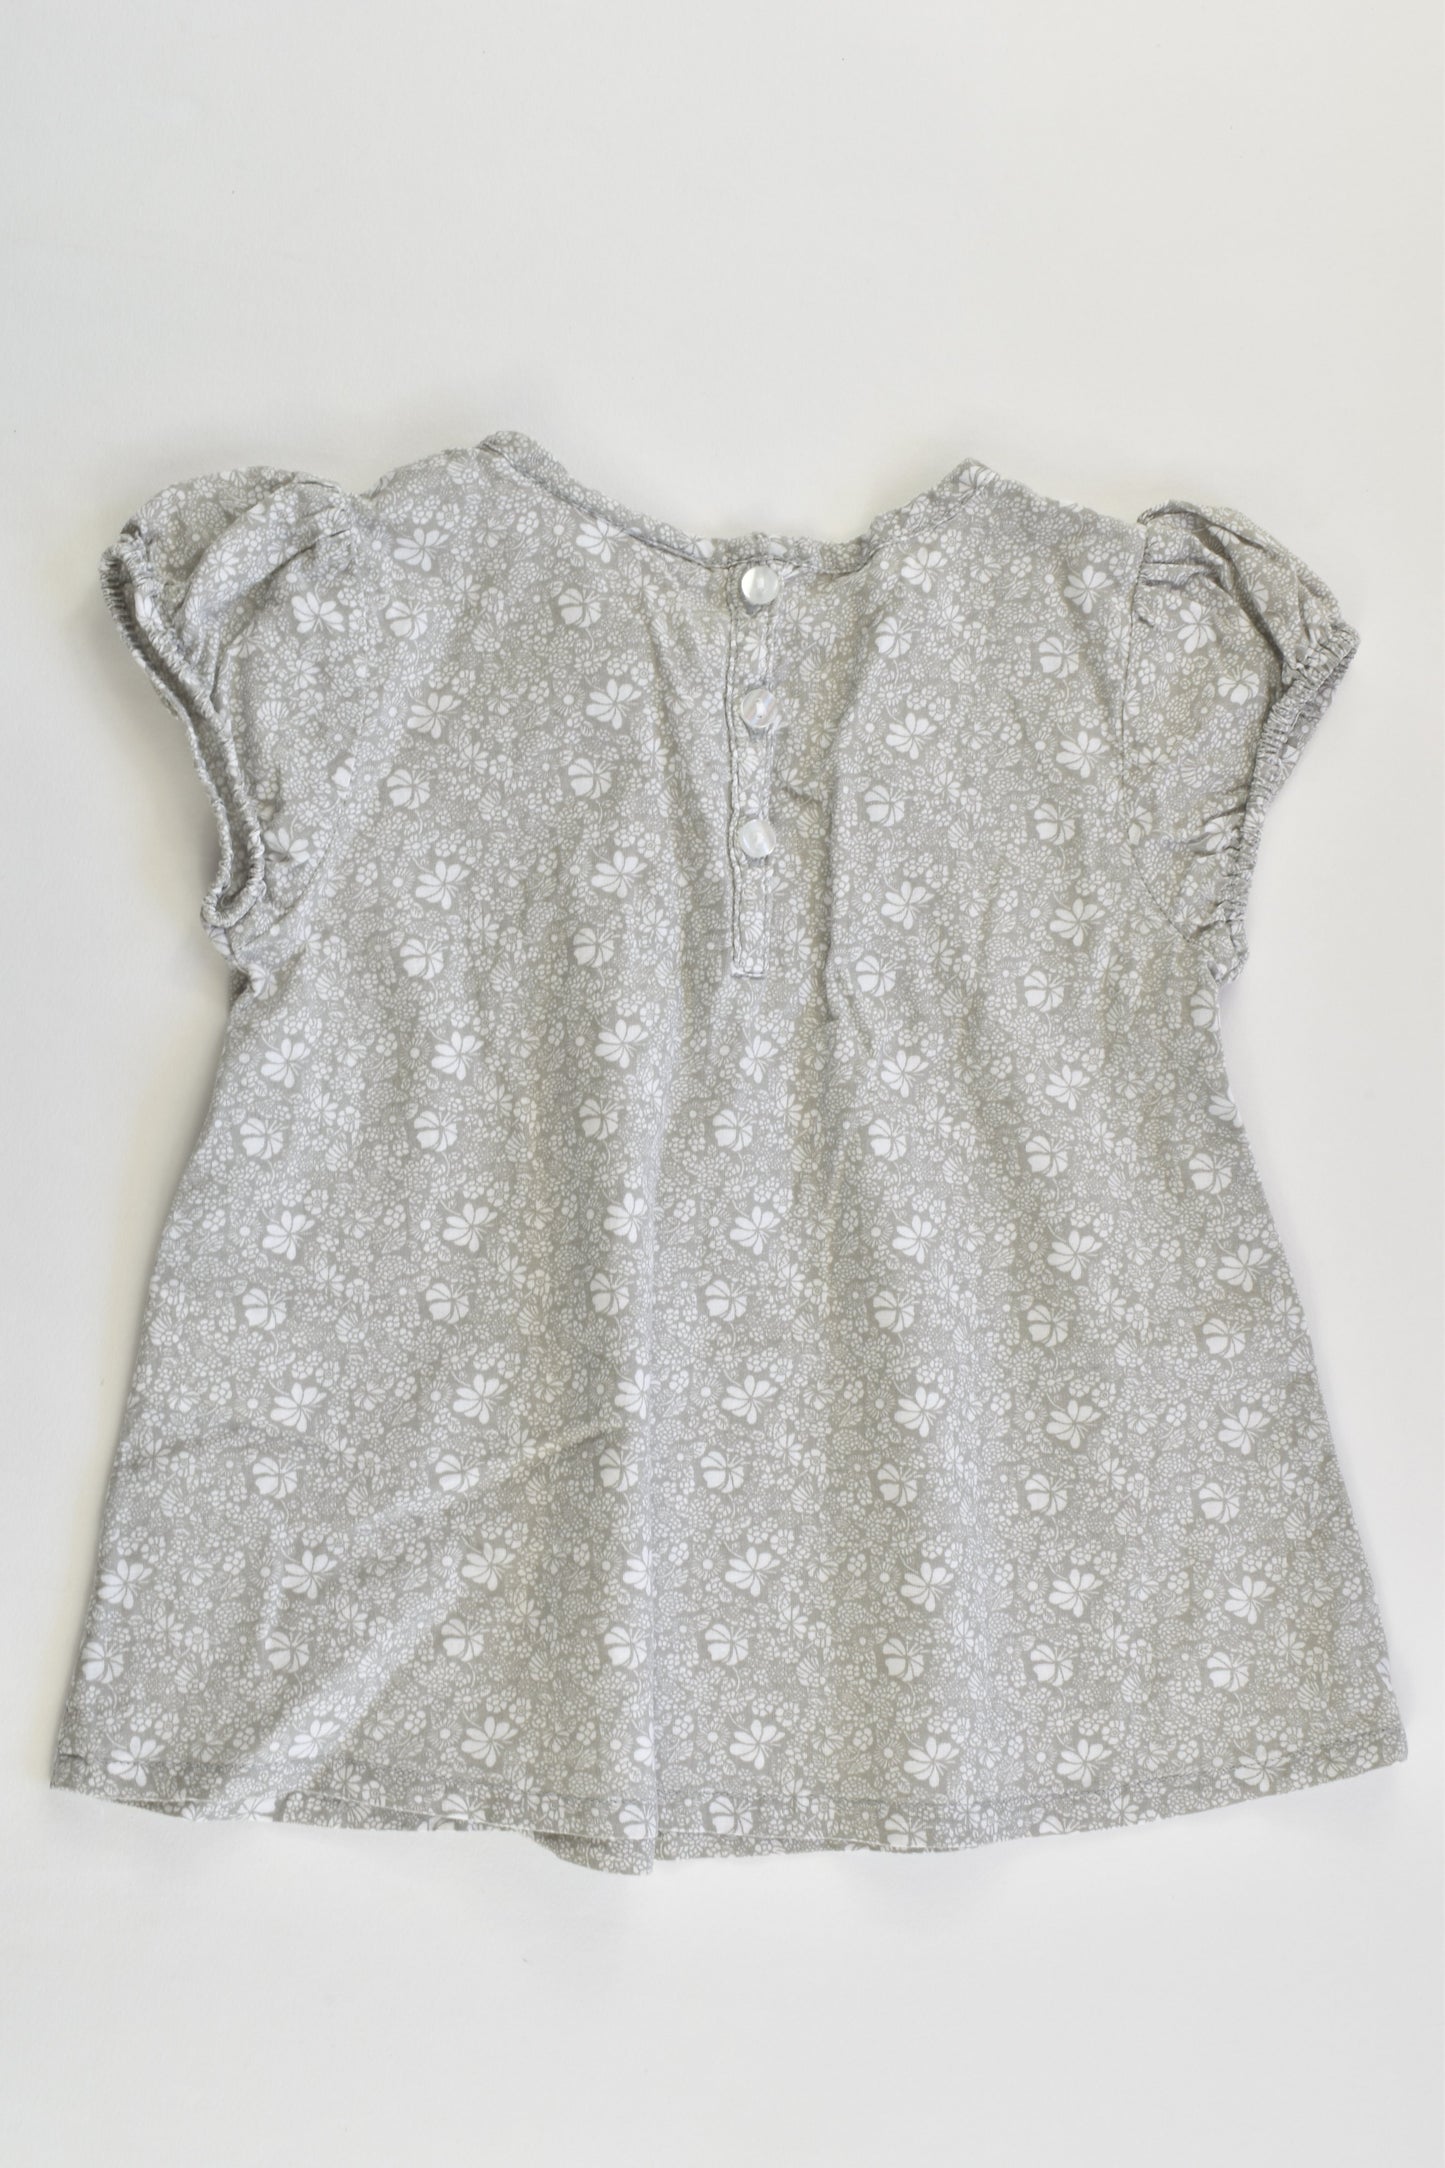 The Little White Company (London) Size 0 (6-9 months) Floral Blouse